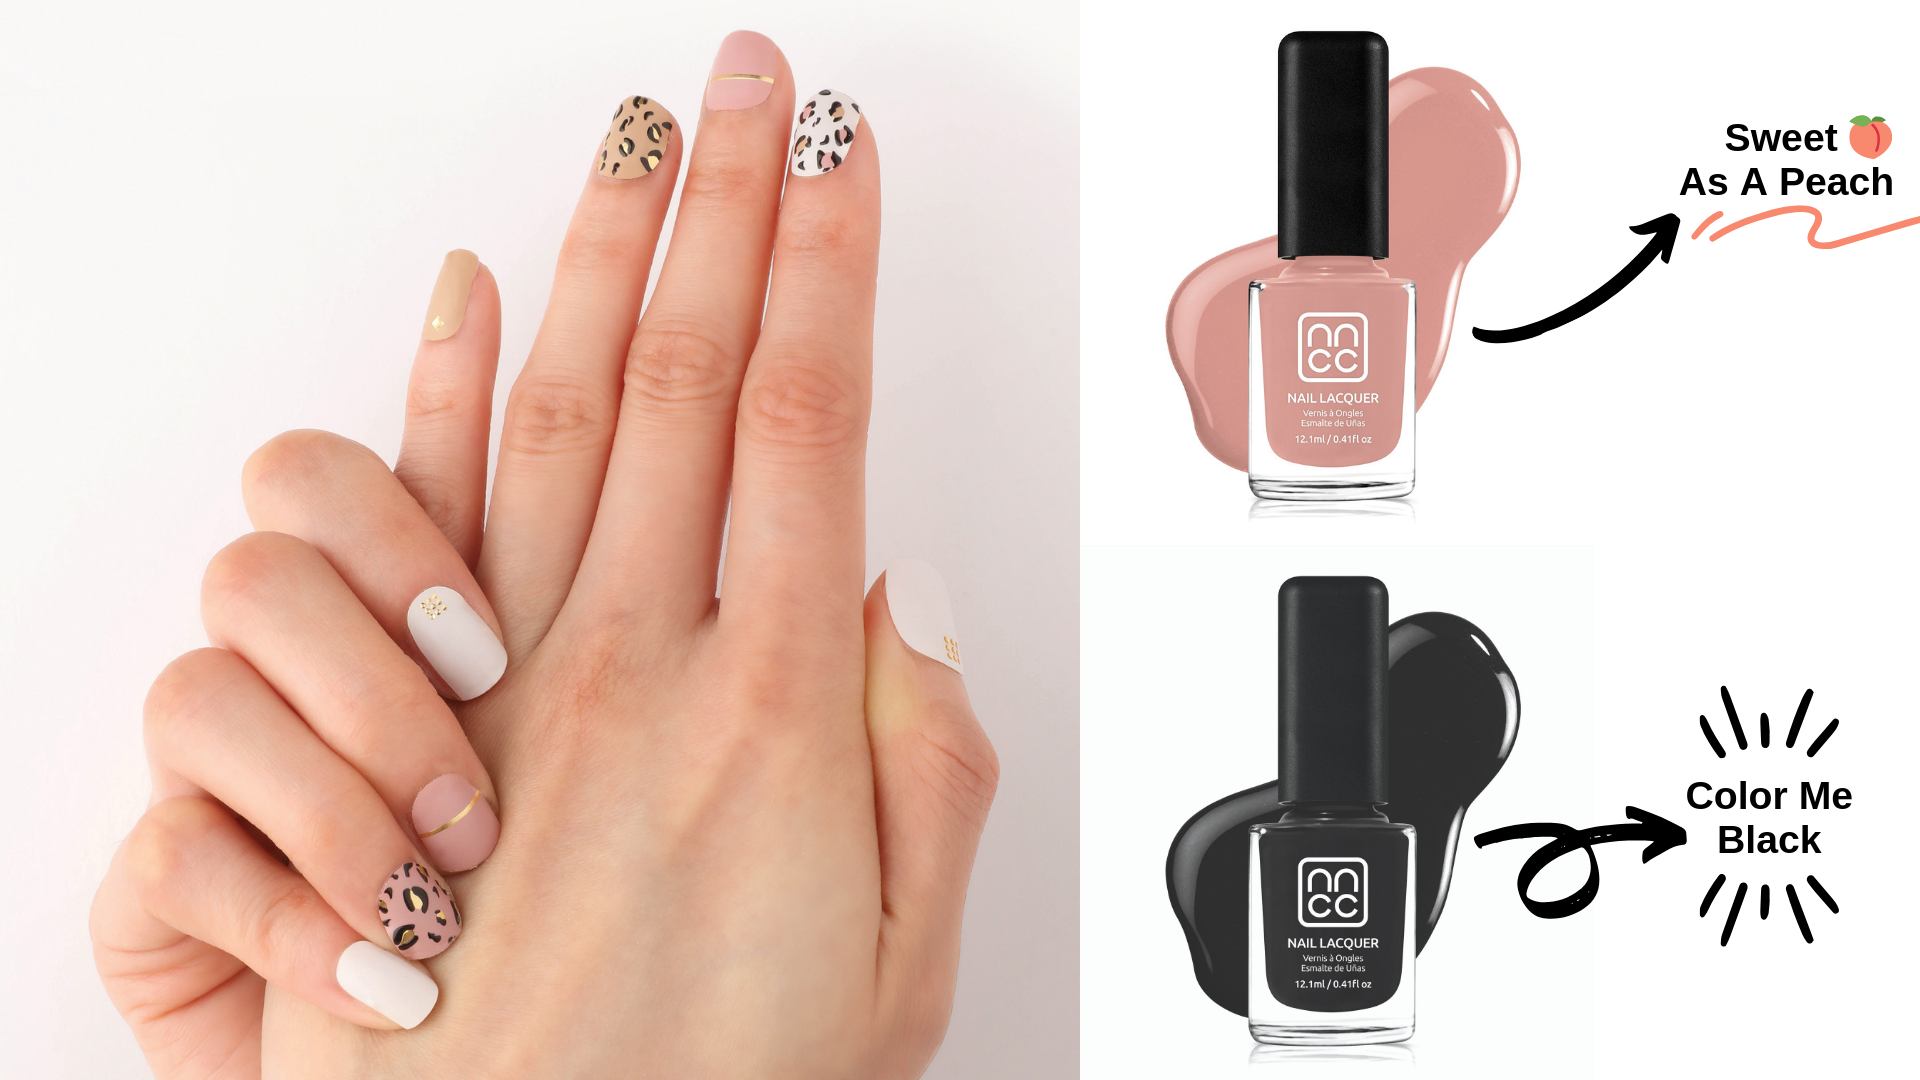 Nanacoco Insta Gel Nail Strips in Leopard and coordinating Nail Lacquer in Sweet As A Peach and Color Me Black